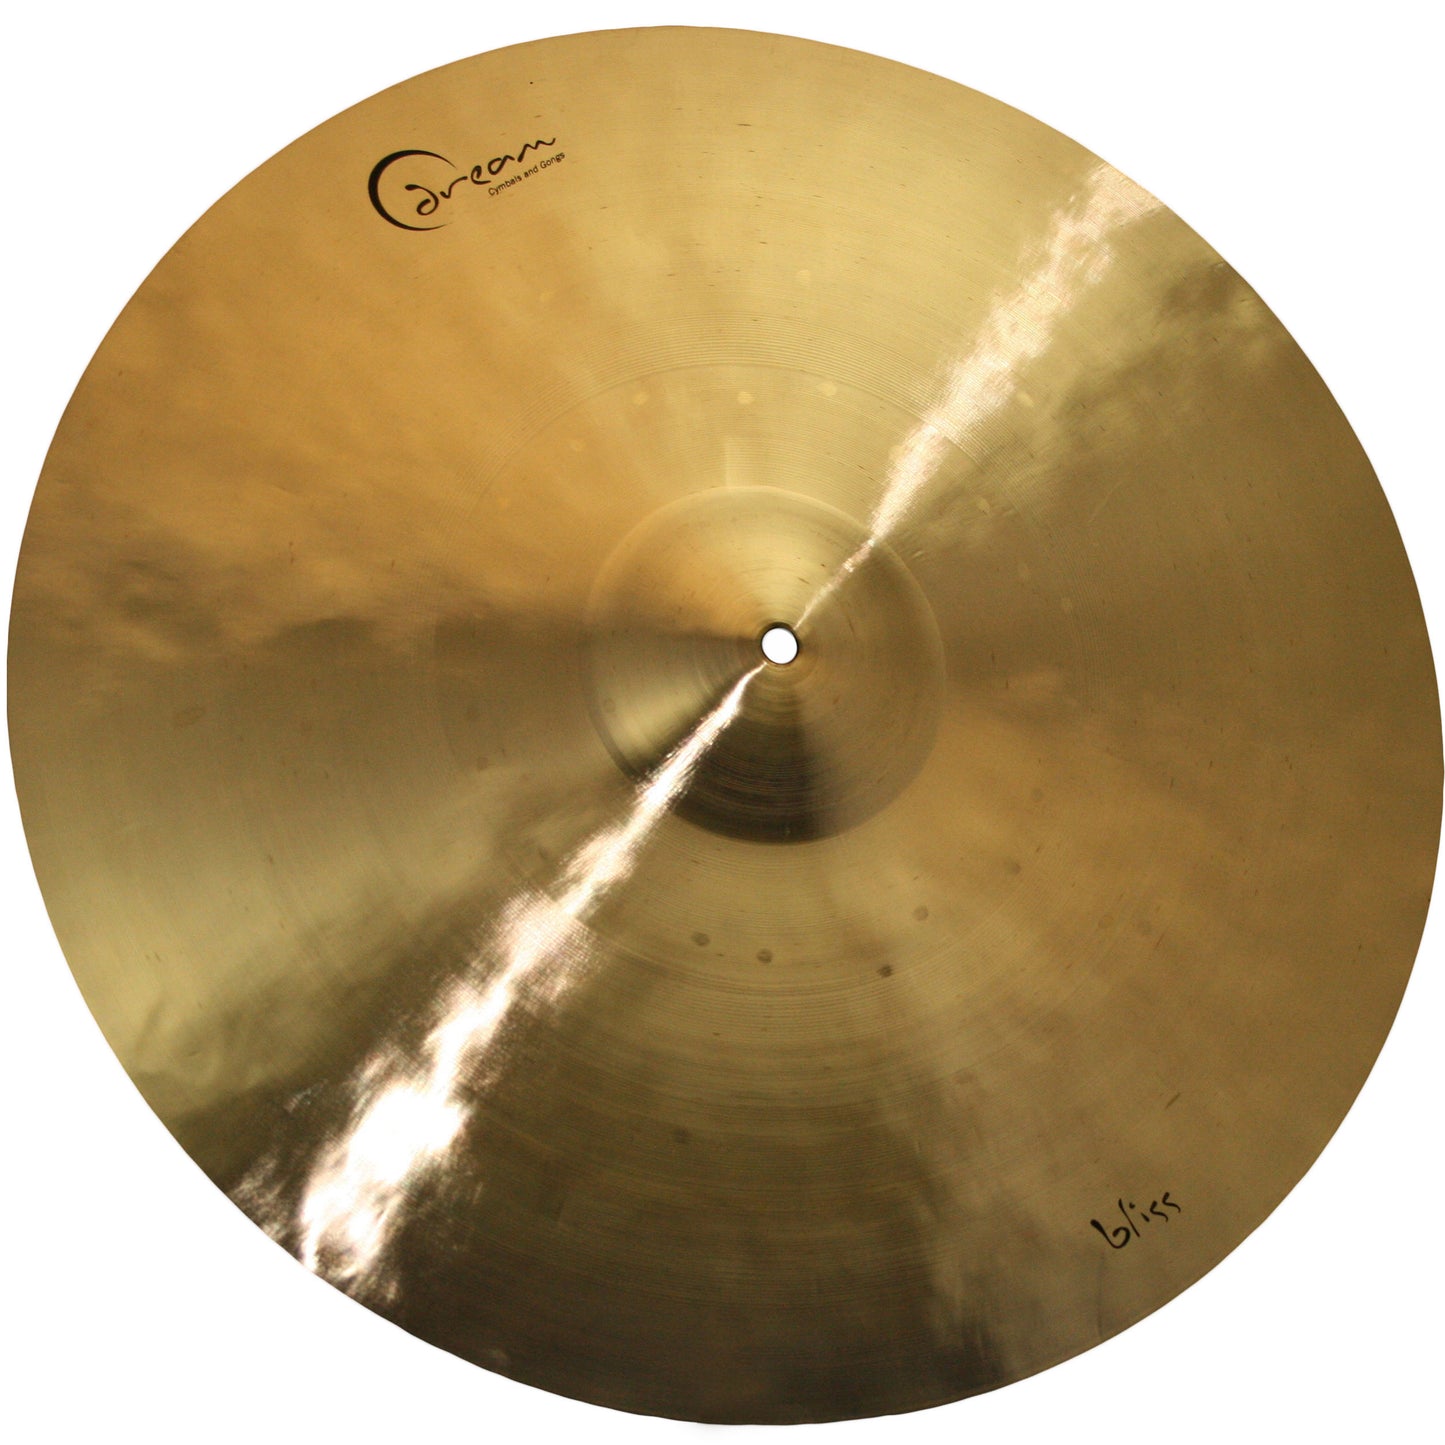 Dream 22” Bliss Series Ride Cymbal